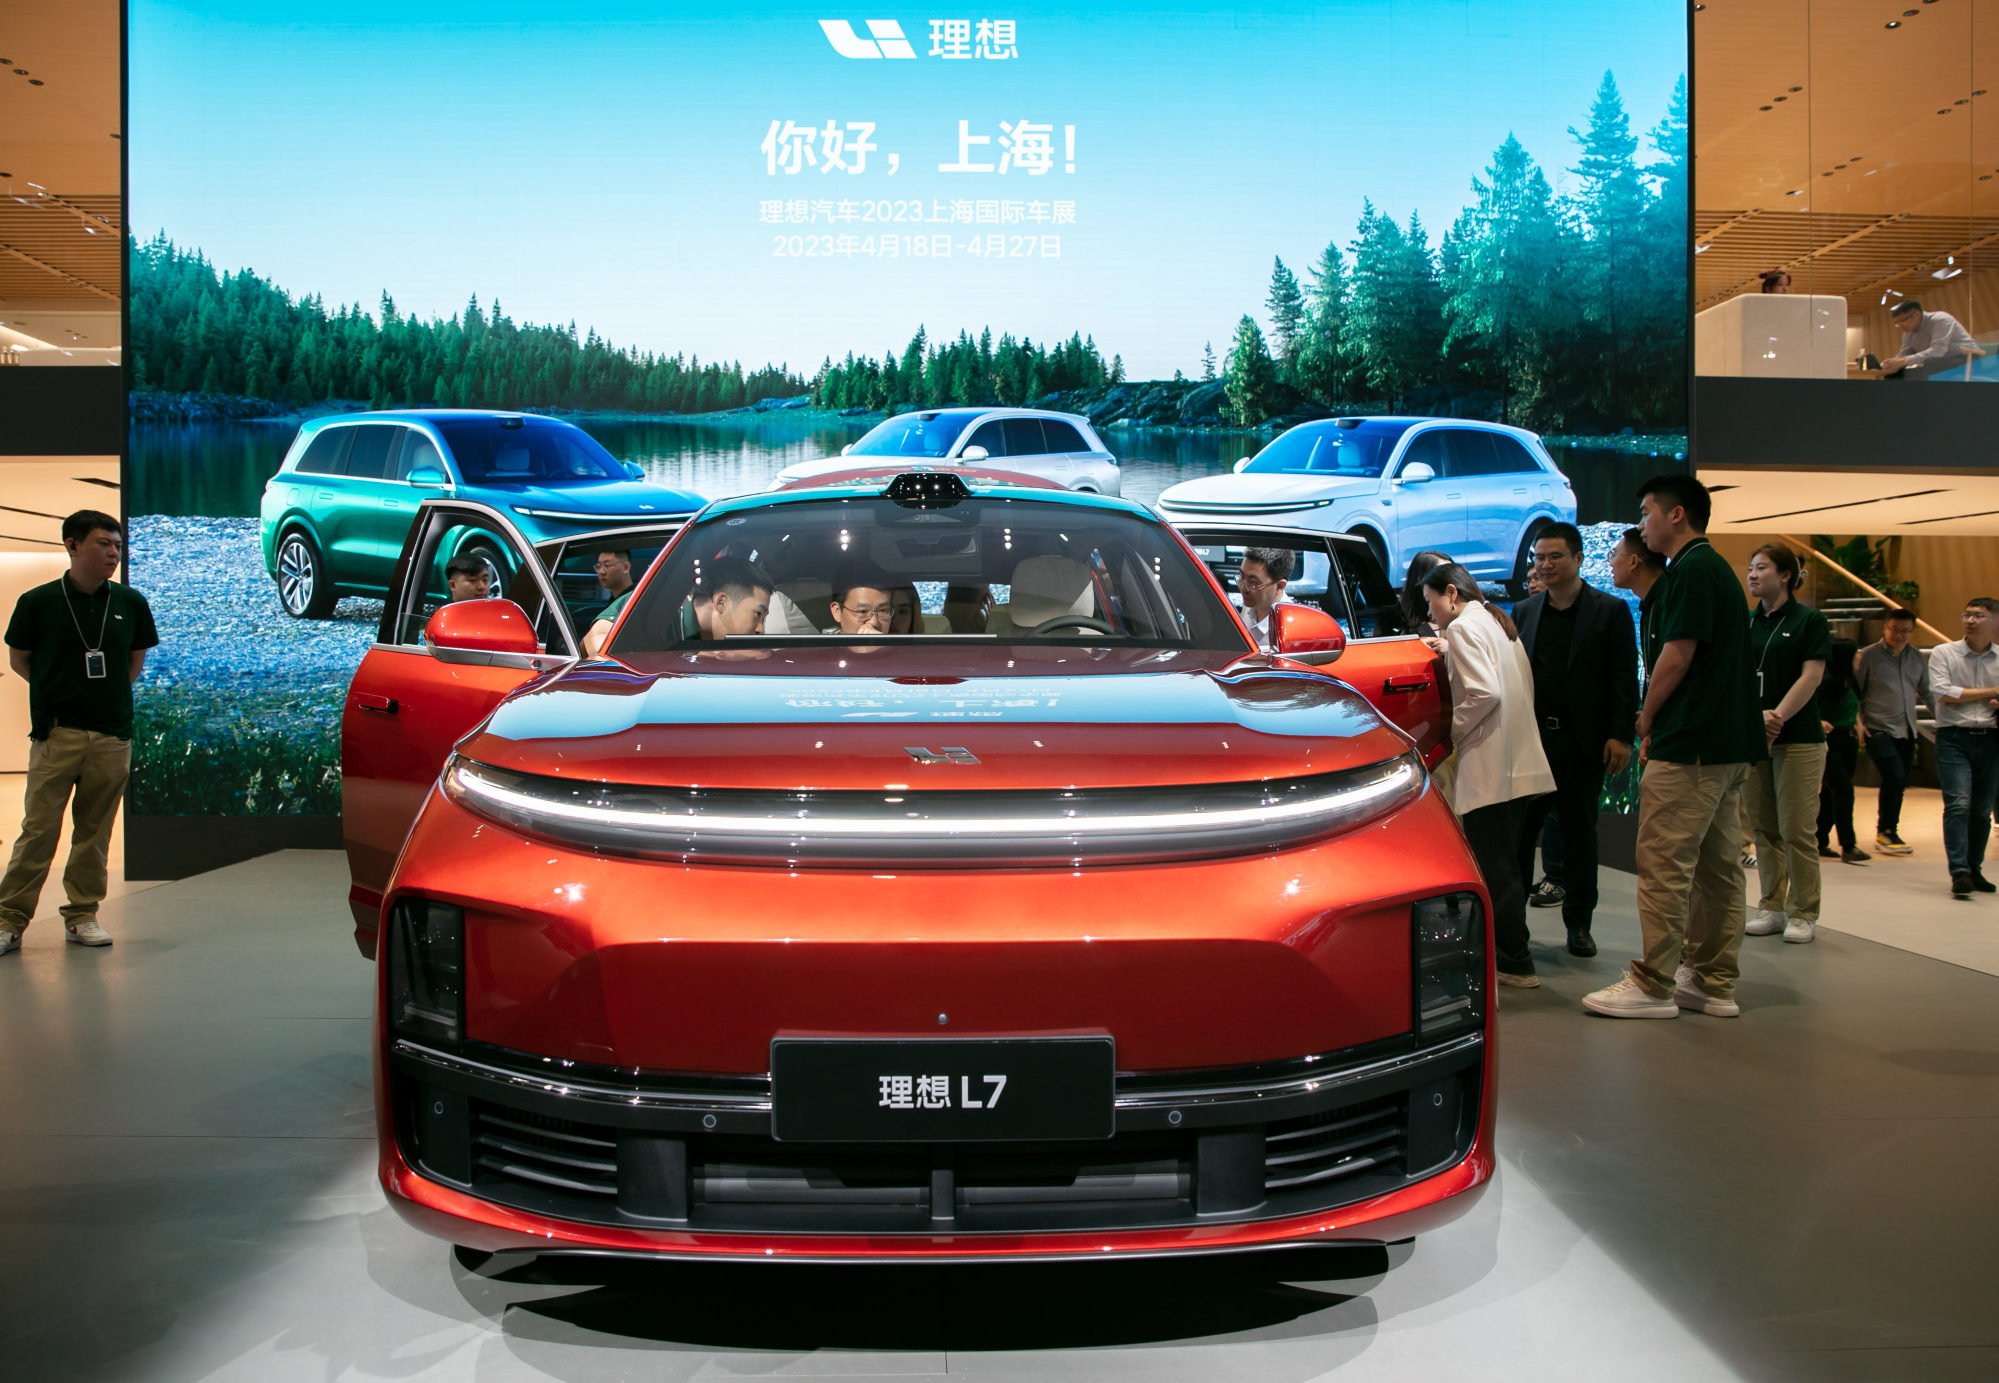 Chinese EV makers Li Auto, Xpeng and Nio ride discounts to solid sales growth - South China Morning Post